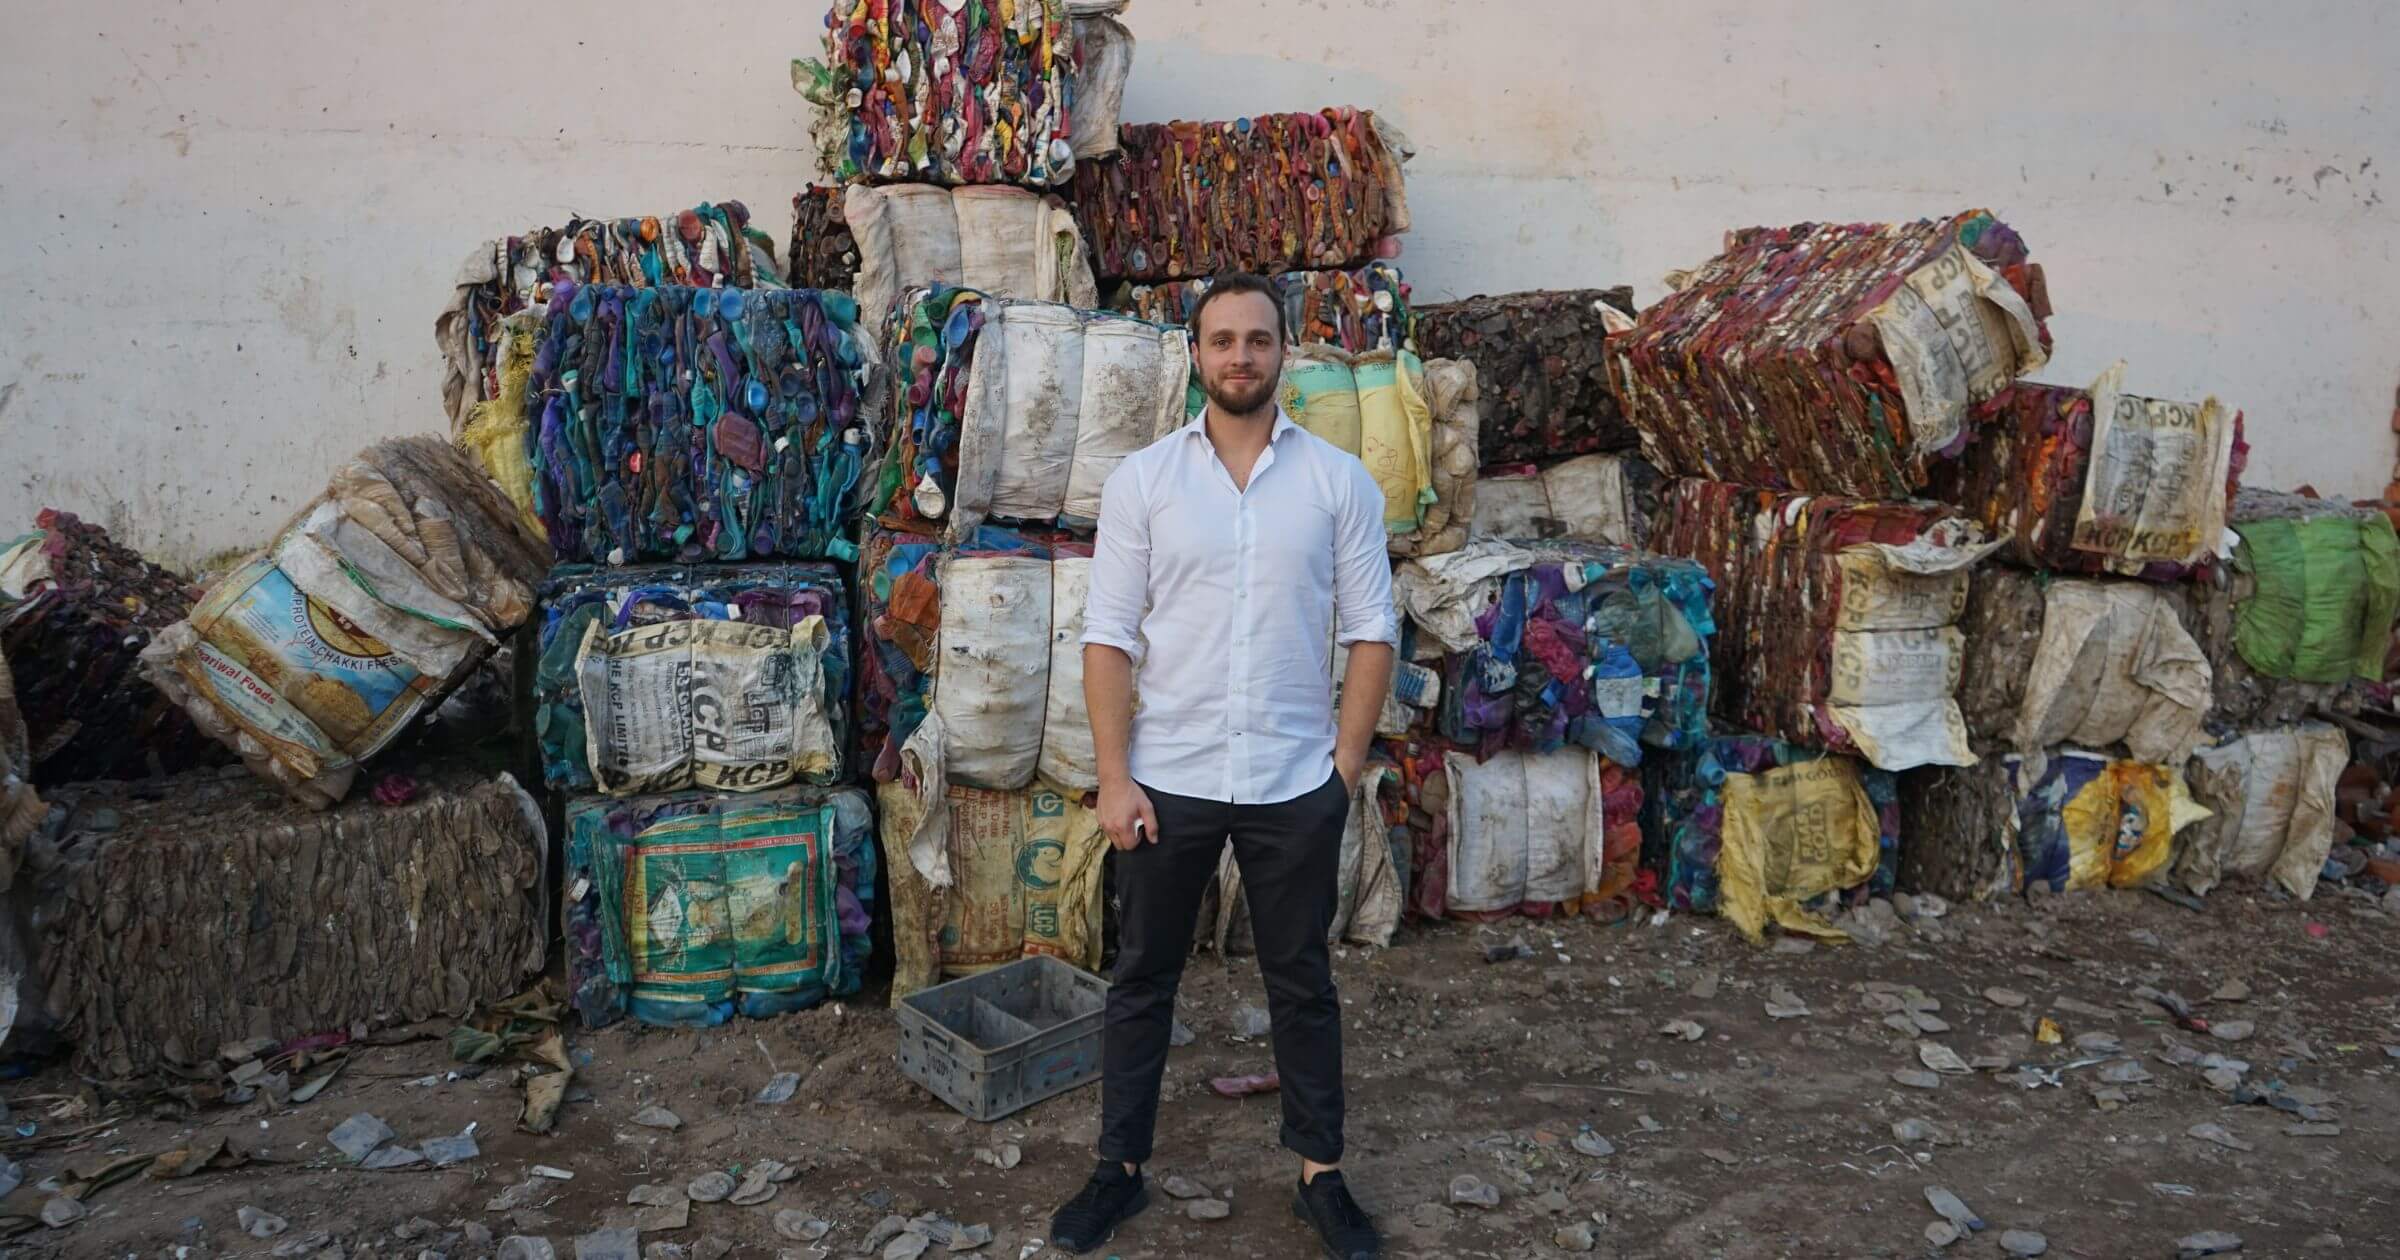 Joel Tasche, co-founder of CleanHub, stands in front of piles of collected plastic